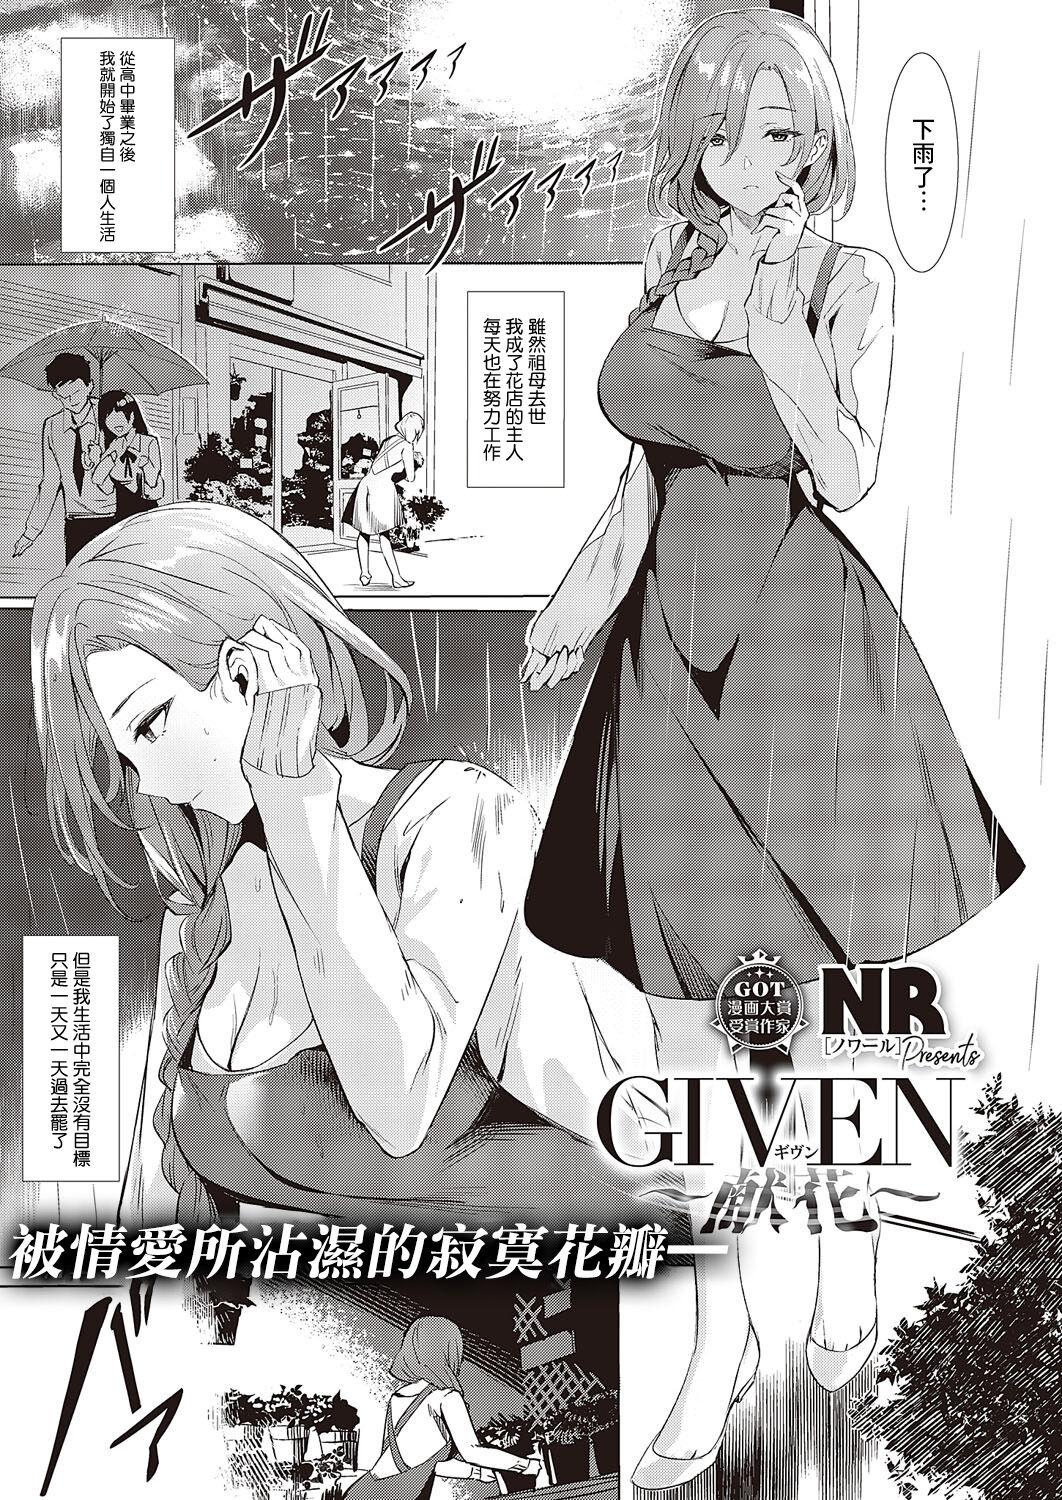 【NR】GIVEN 1